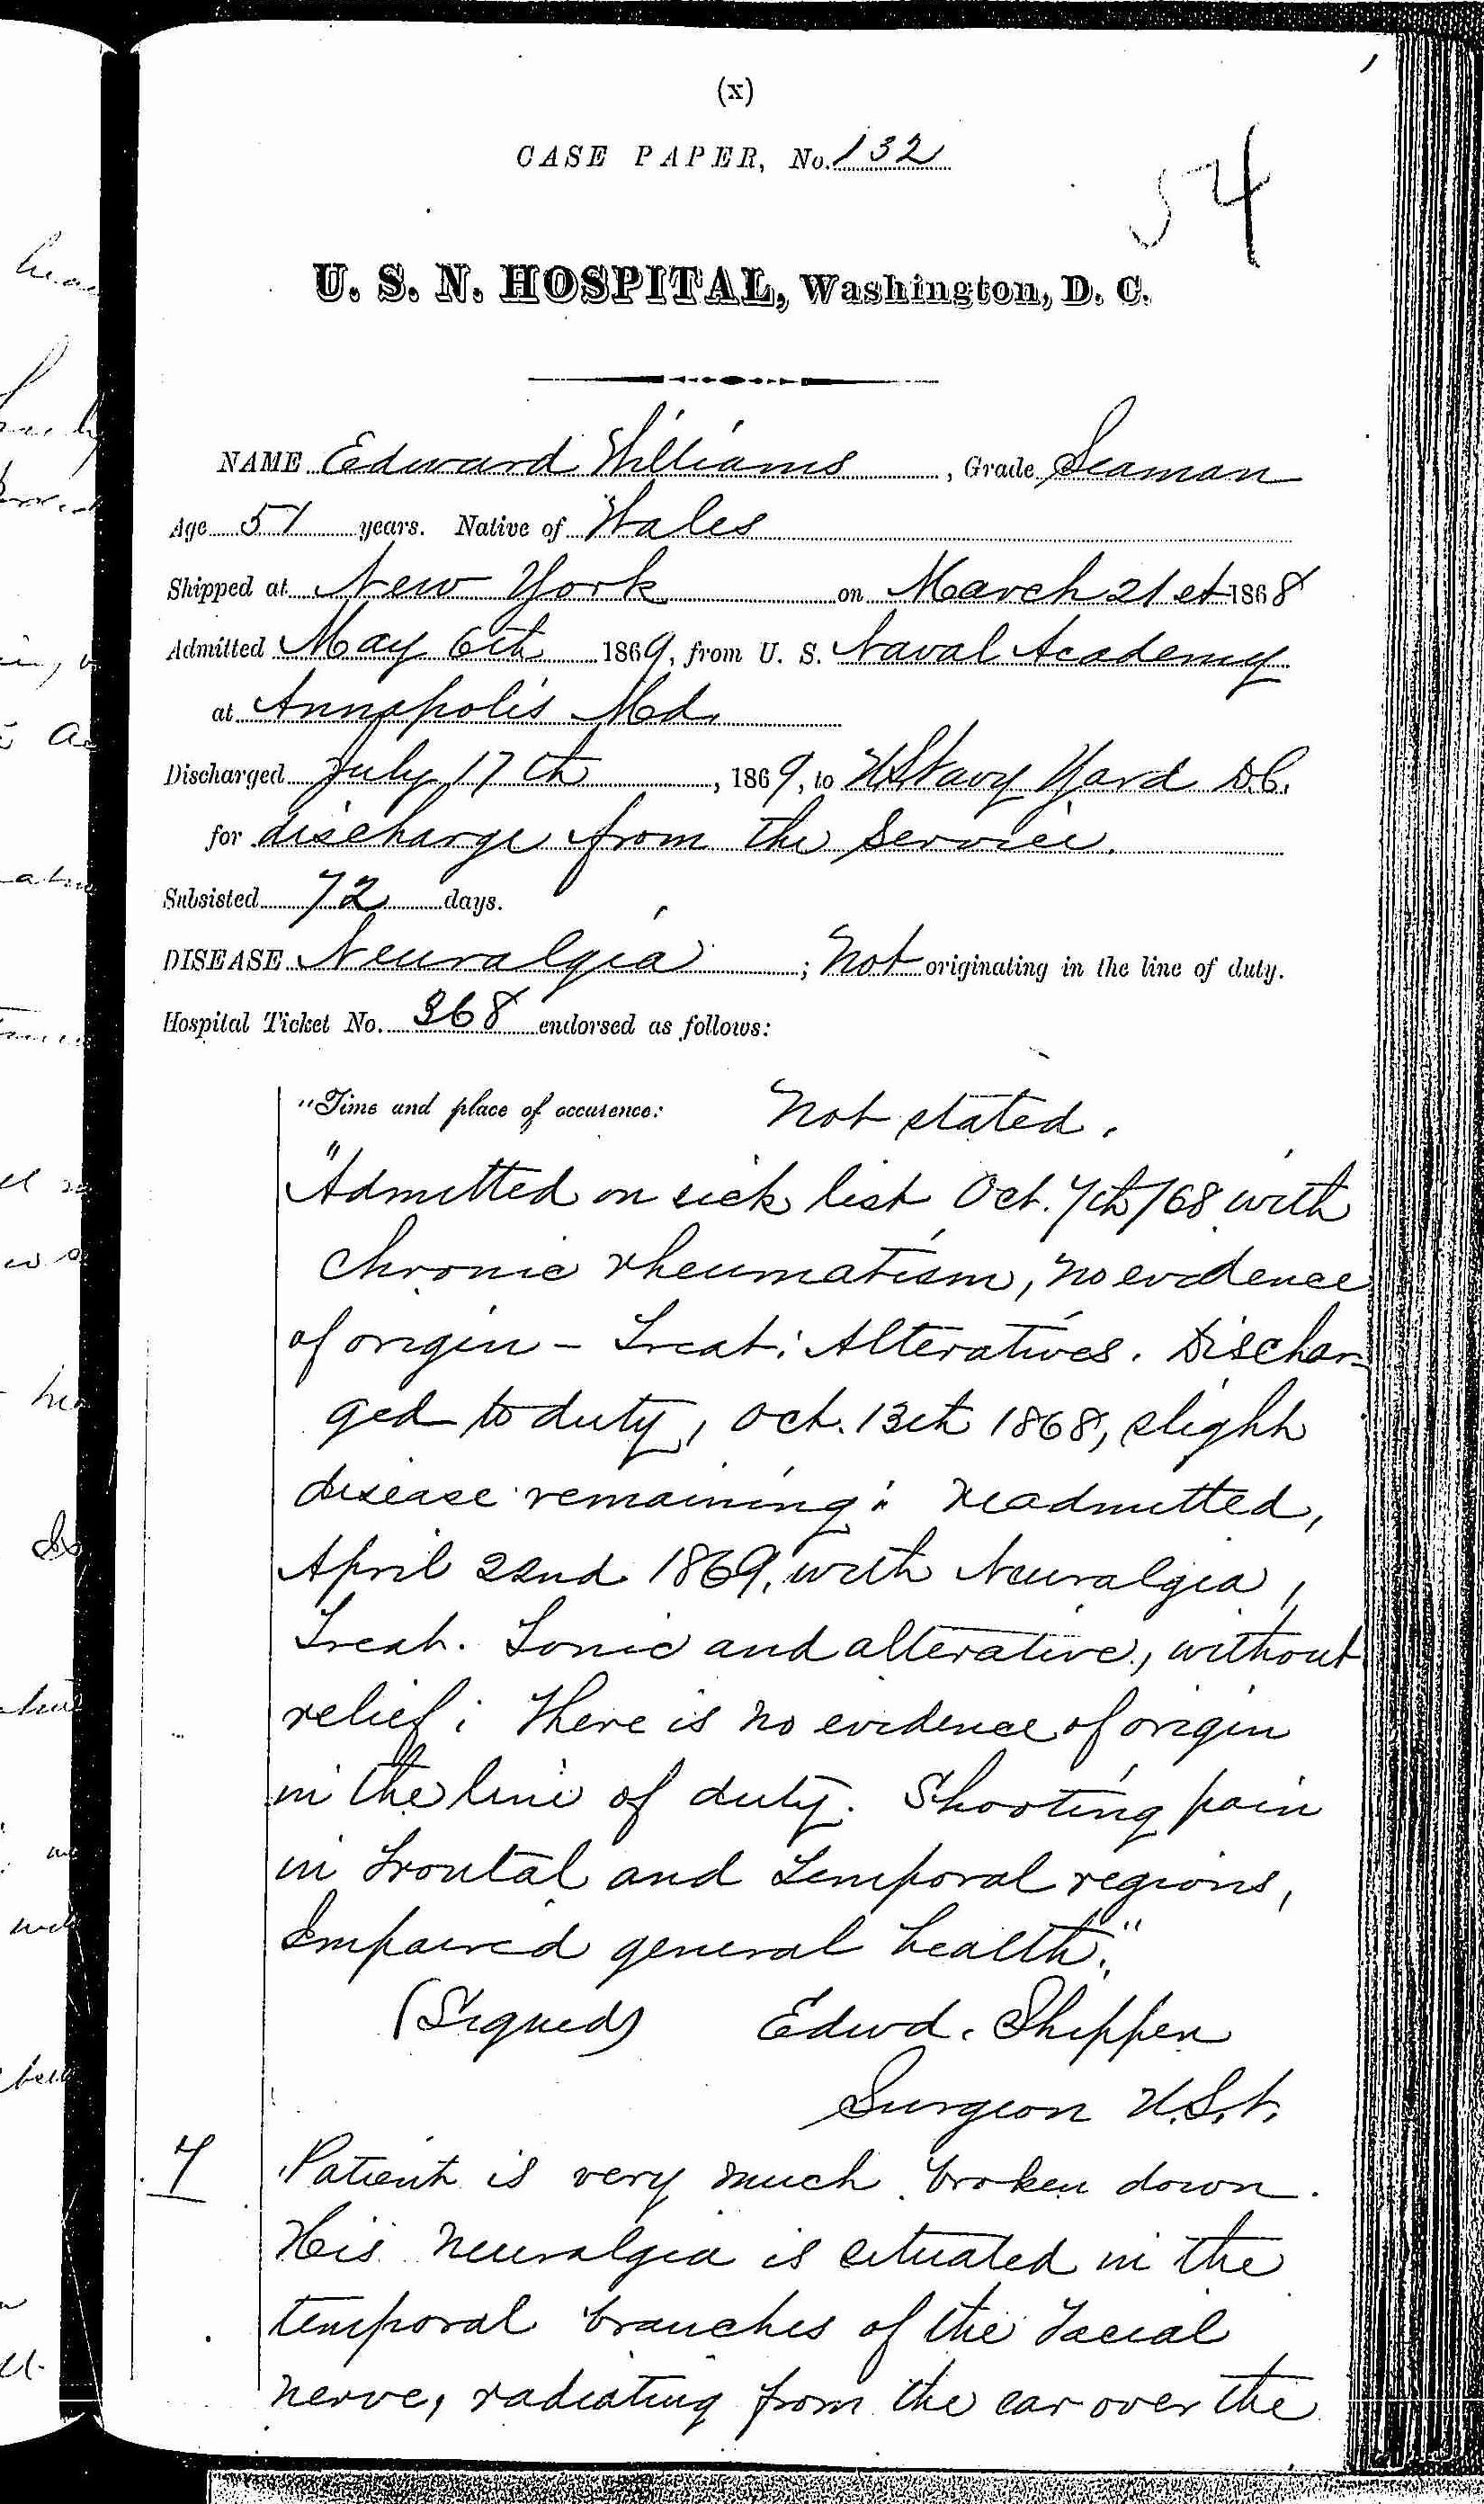 Entry for Edward Williams (page 1 of 6) in the log Hospital Tickets and Case Papers - Naval Hospital - Washington, D.C. - 1868-69